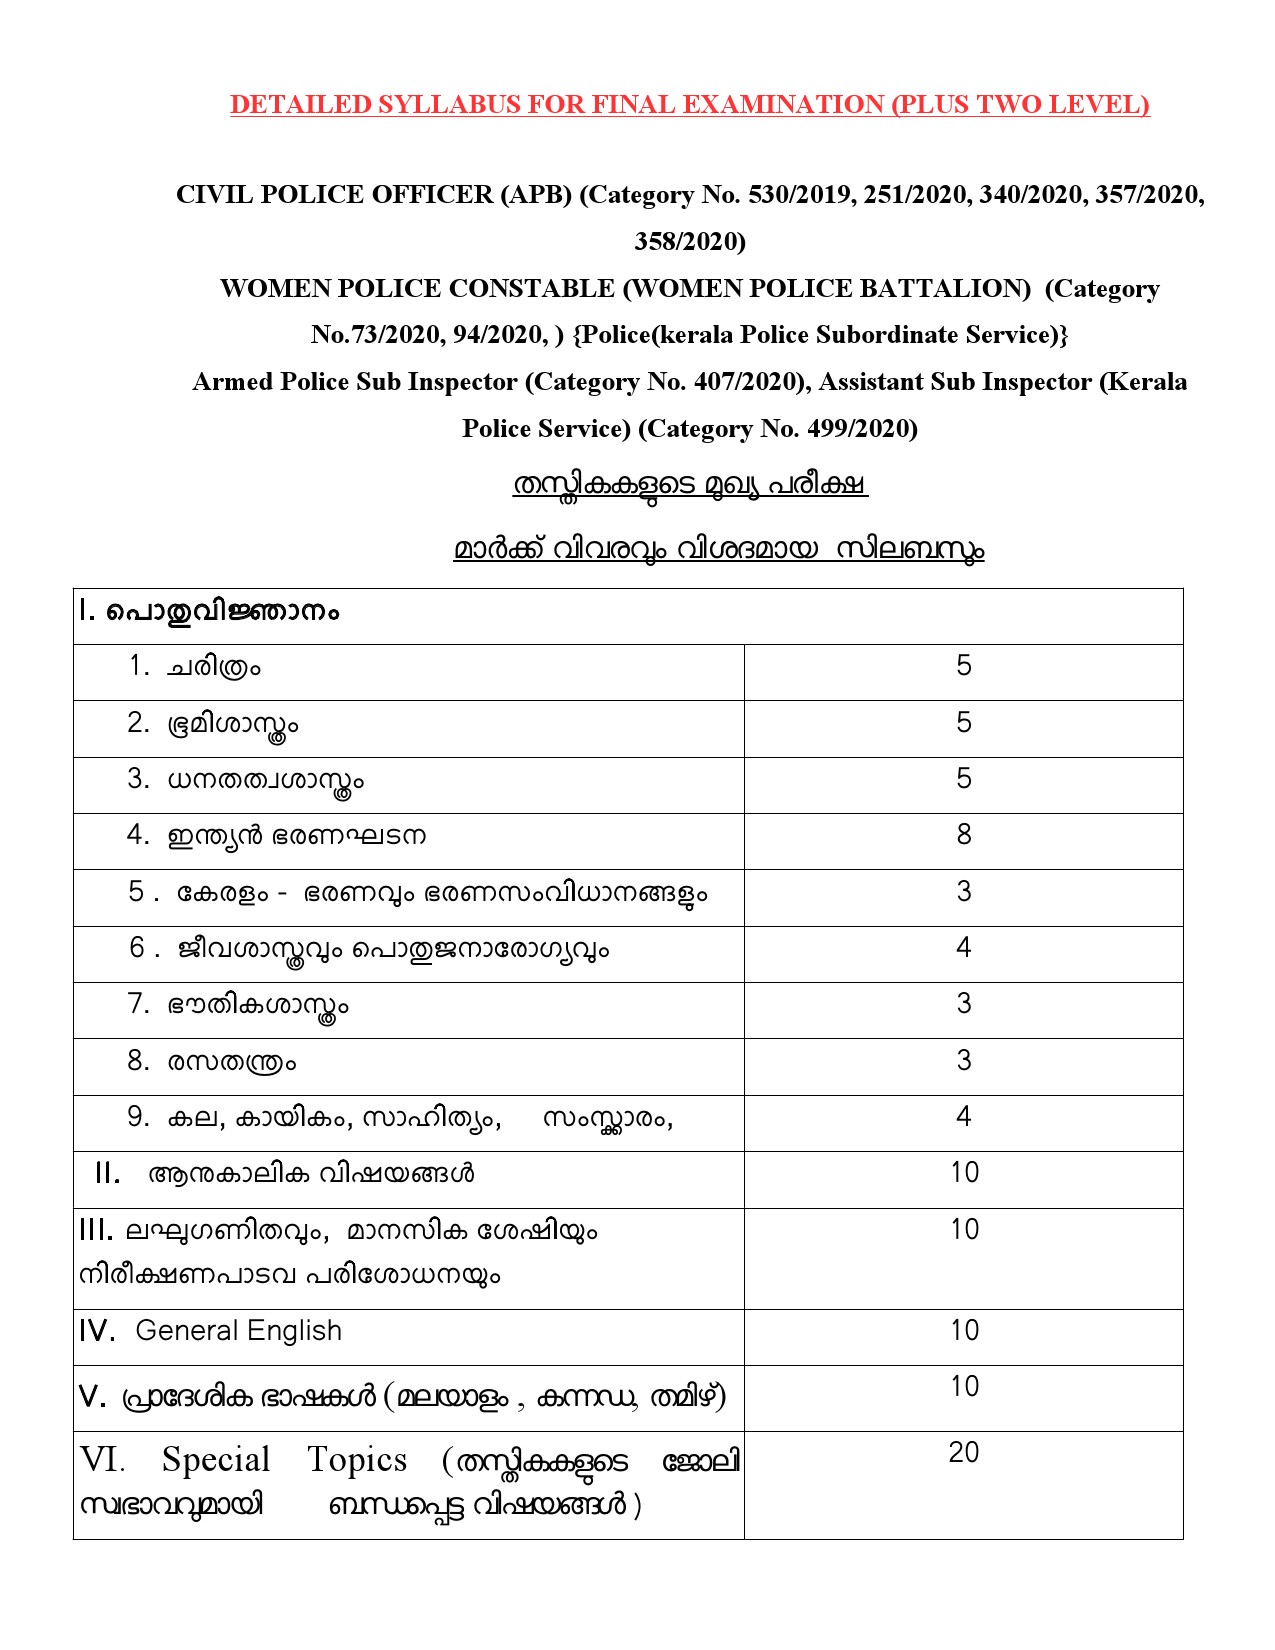 Civil Police Officer Final Examination Syllabus For Plus Two Level - Notification Image 1